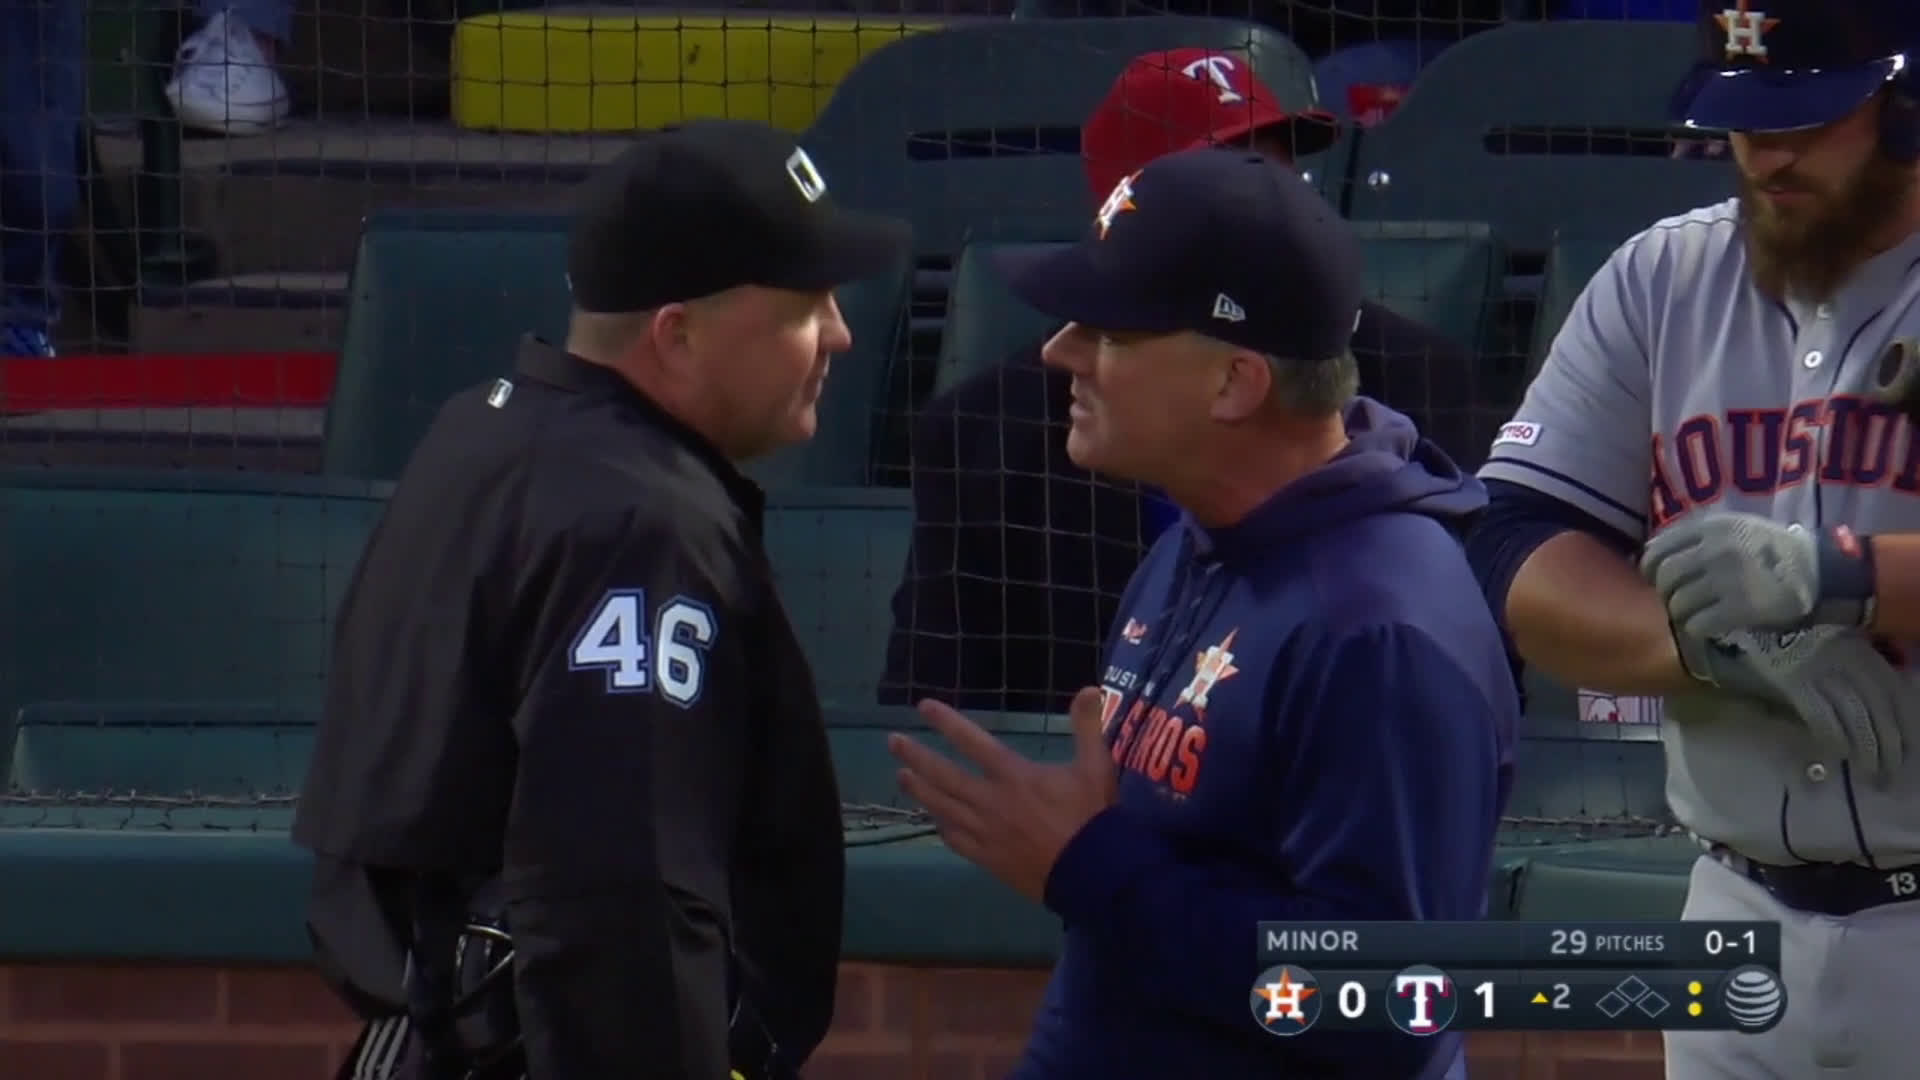 Astros manager A.J. Hinch jokingly dons 'Coach' on jersey